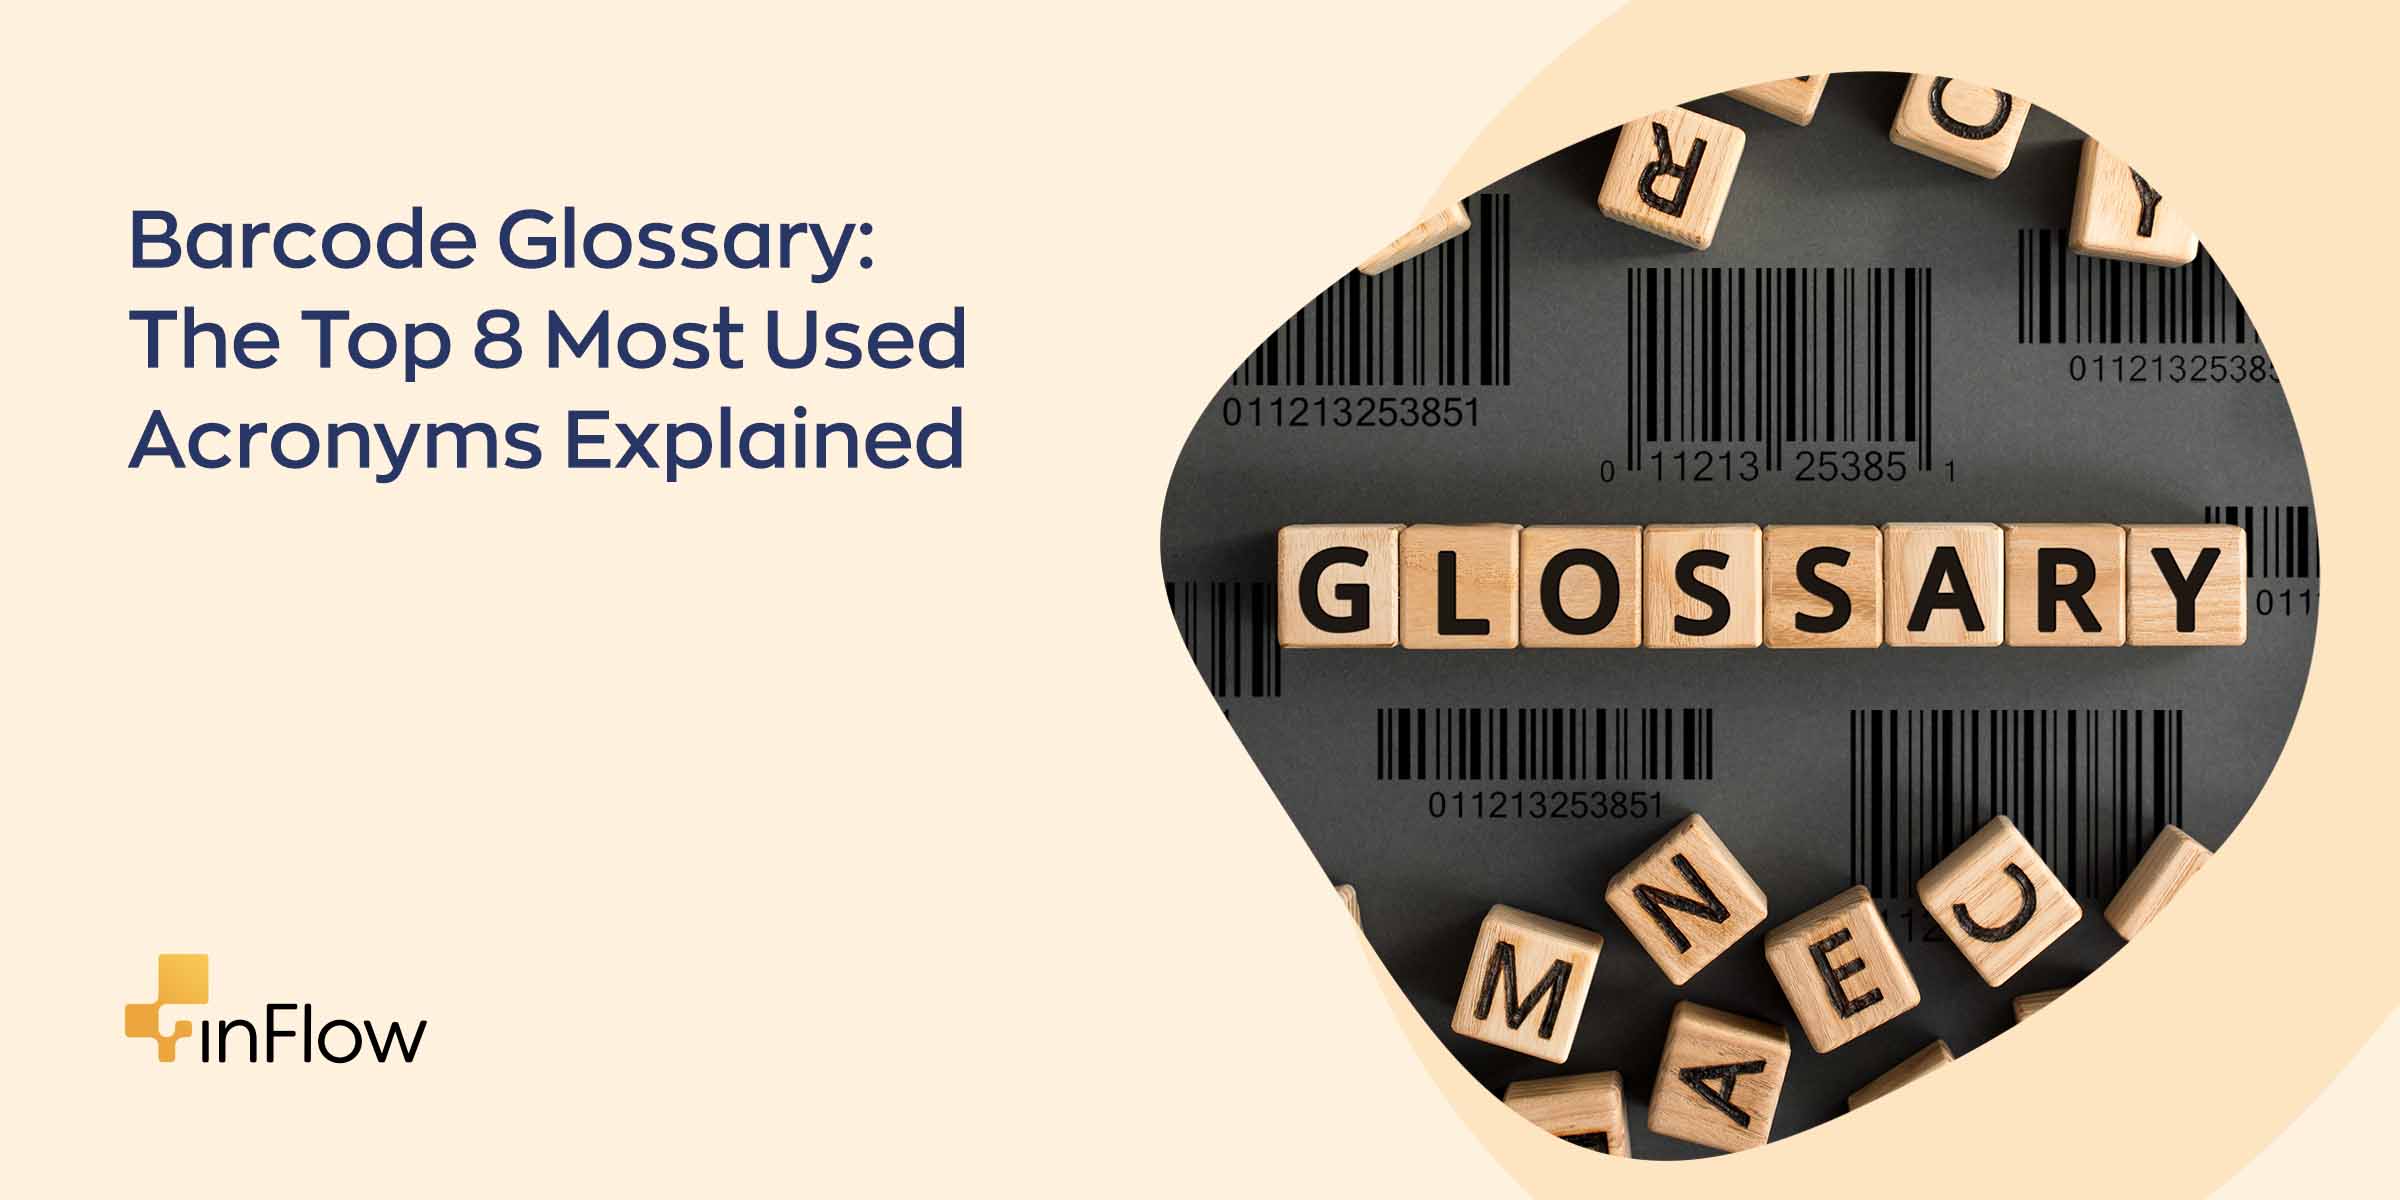 Barcode Glossary: The Top 8 Most Used Acronyms Explained